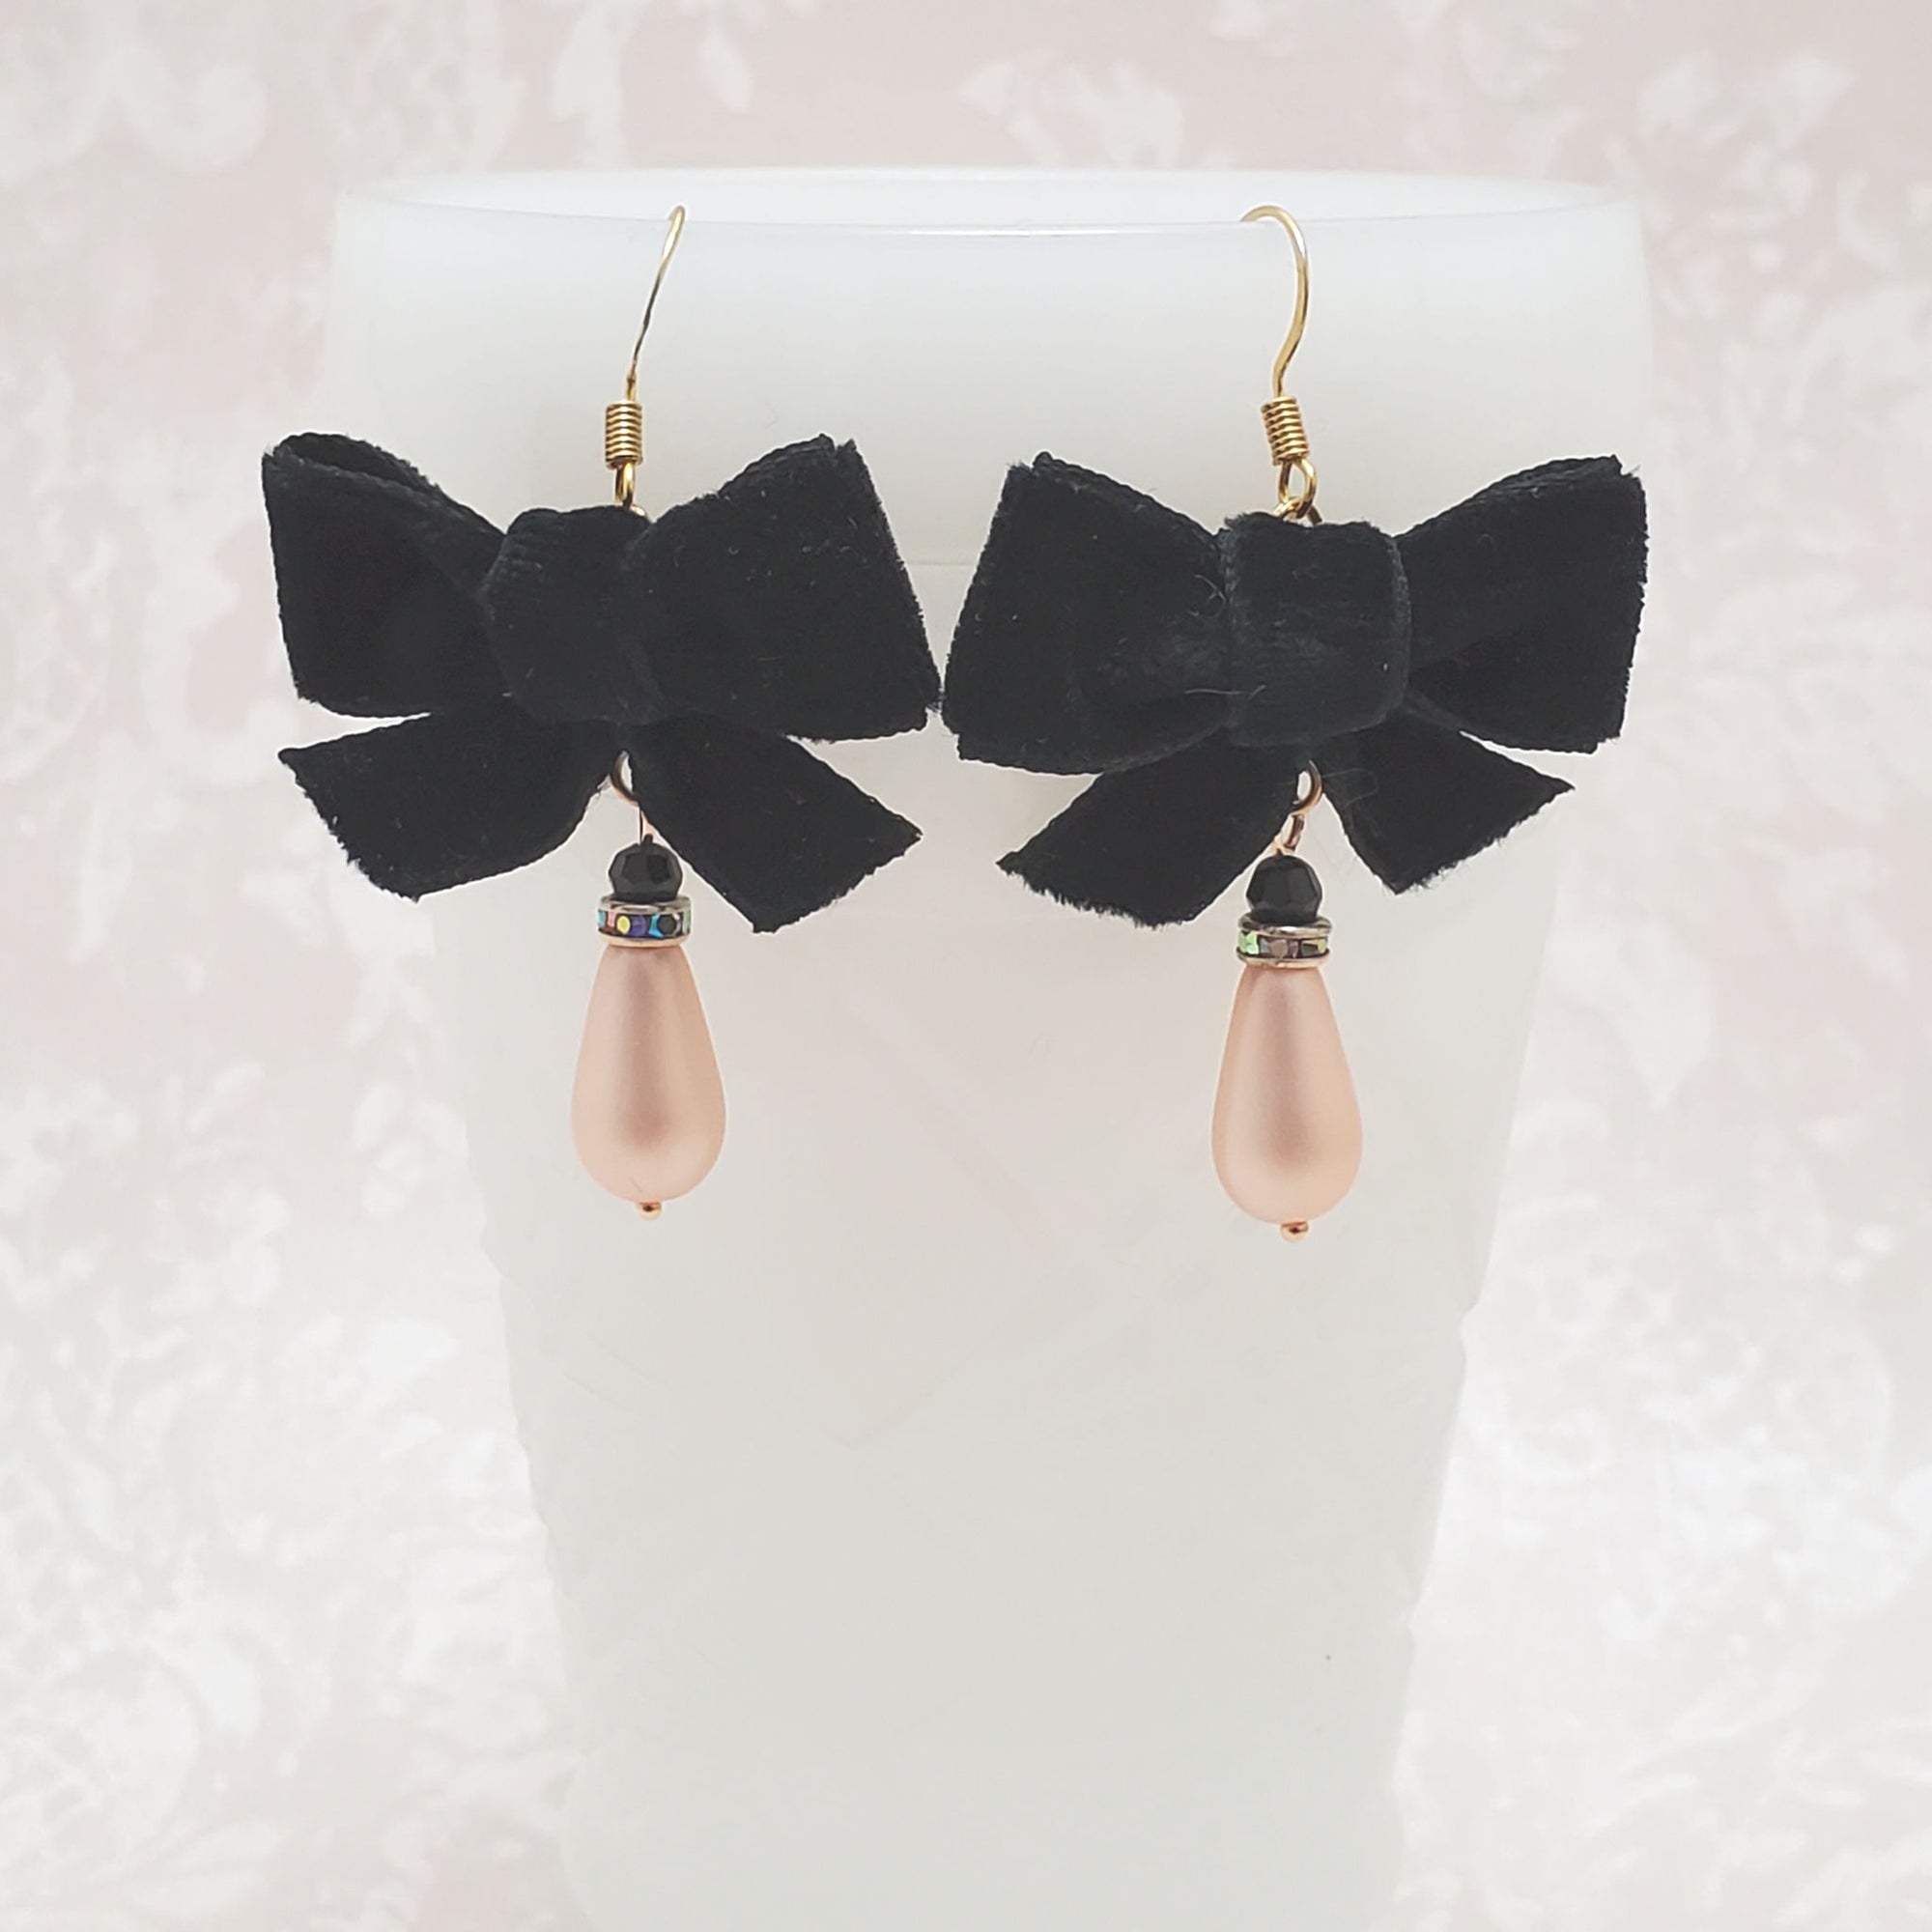 Pale rose glass pearl earrings topped with a black velvet bow